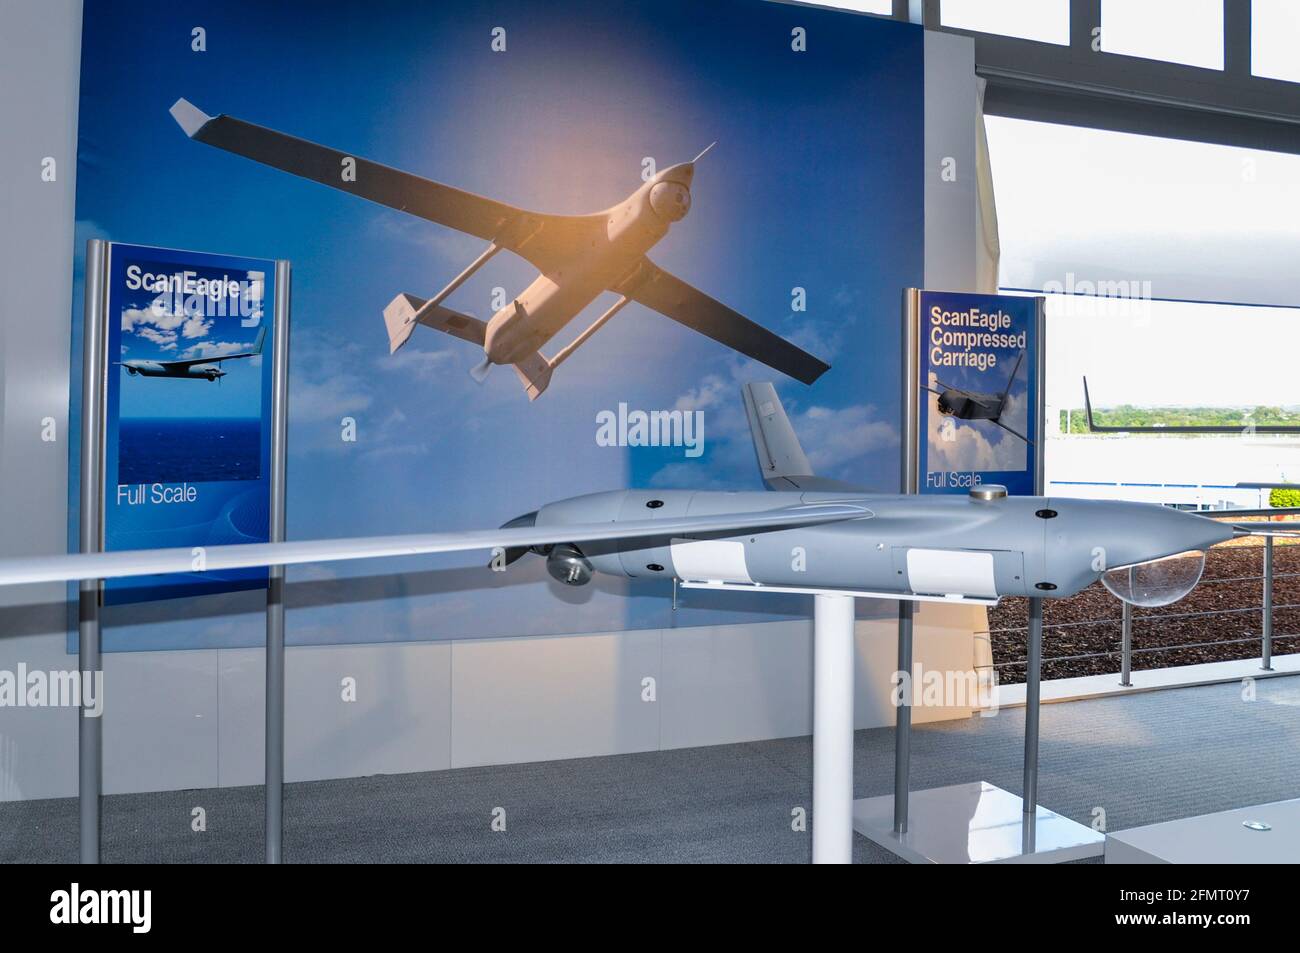 Boeing ScanEagle UAV on show at Farnborough International Airshow 2010, UK. Boeing Insitu ScanEagle small, low-altitude unmanned aerial vehicle (UAV) Stock Photo